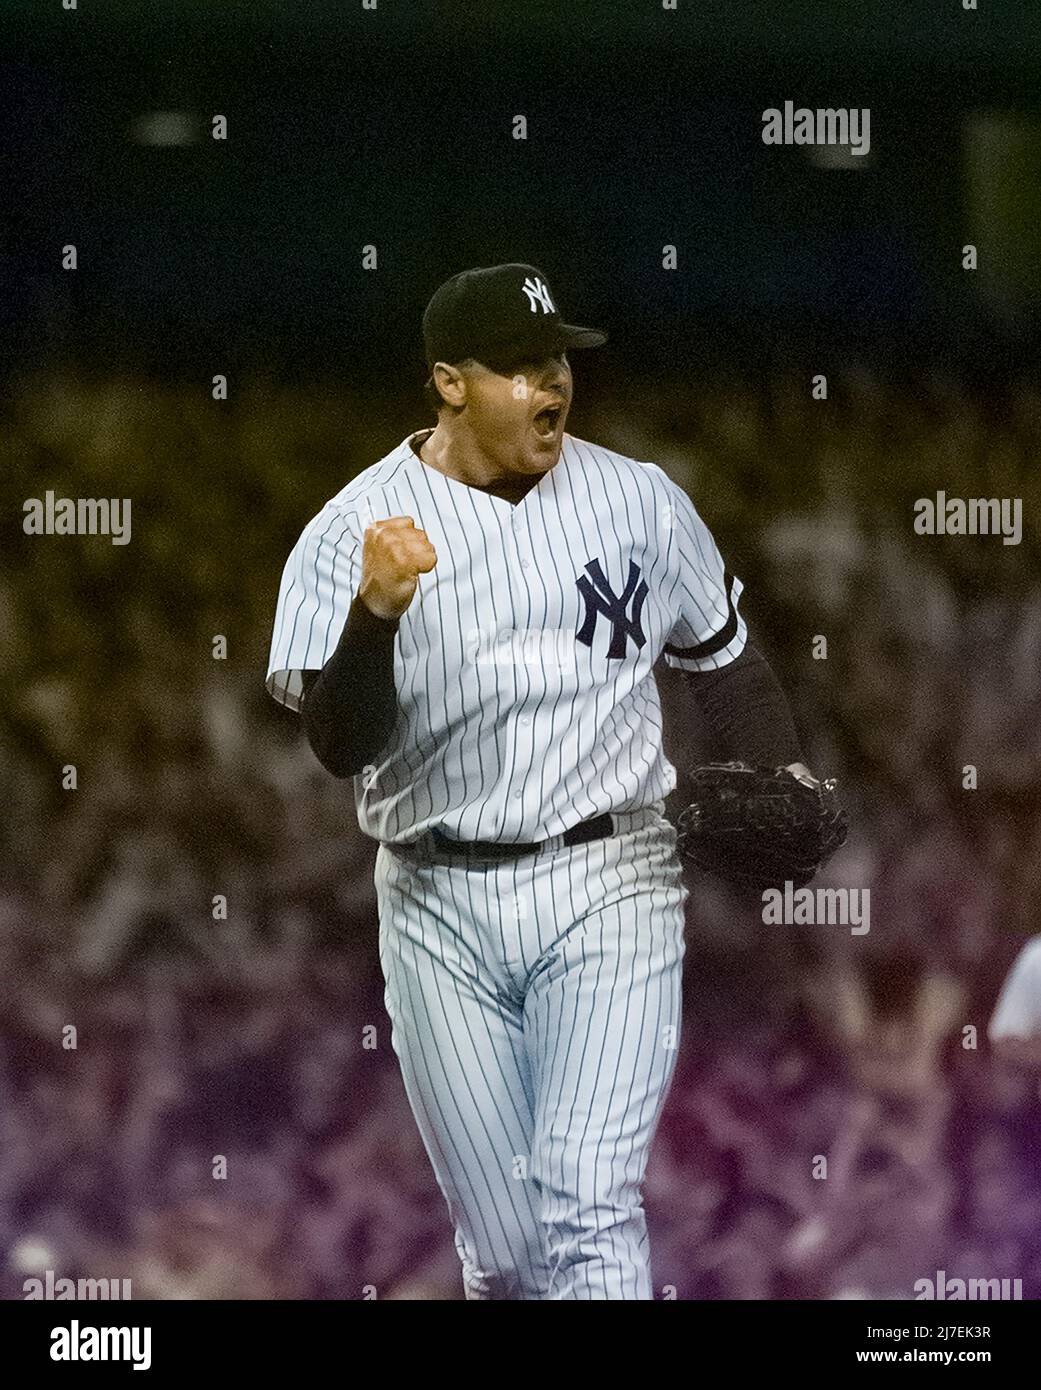 Yankees pitcher Roger Clemens pumps his fist during a game against the Boston Red Sox on May 28, 2000 in New York. Photo credit: Francis Specker Stock Photo